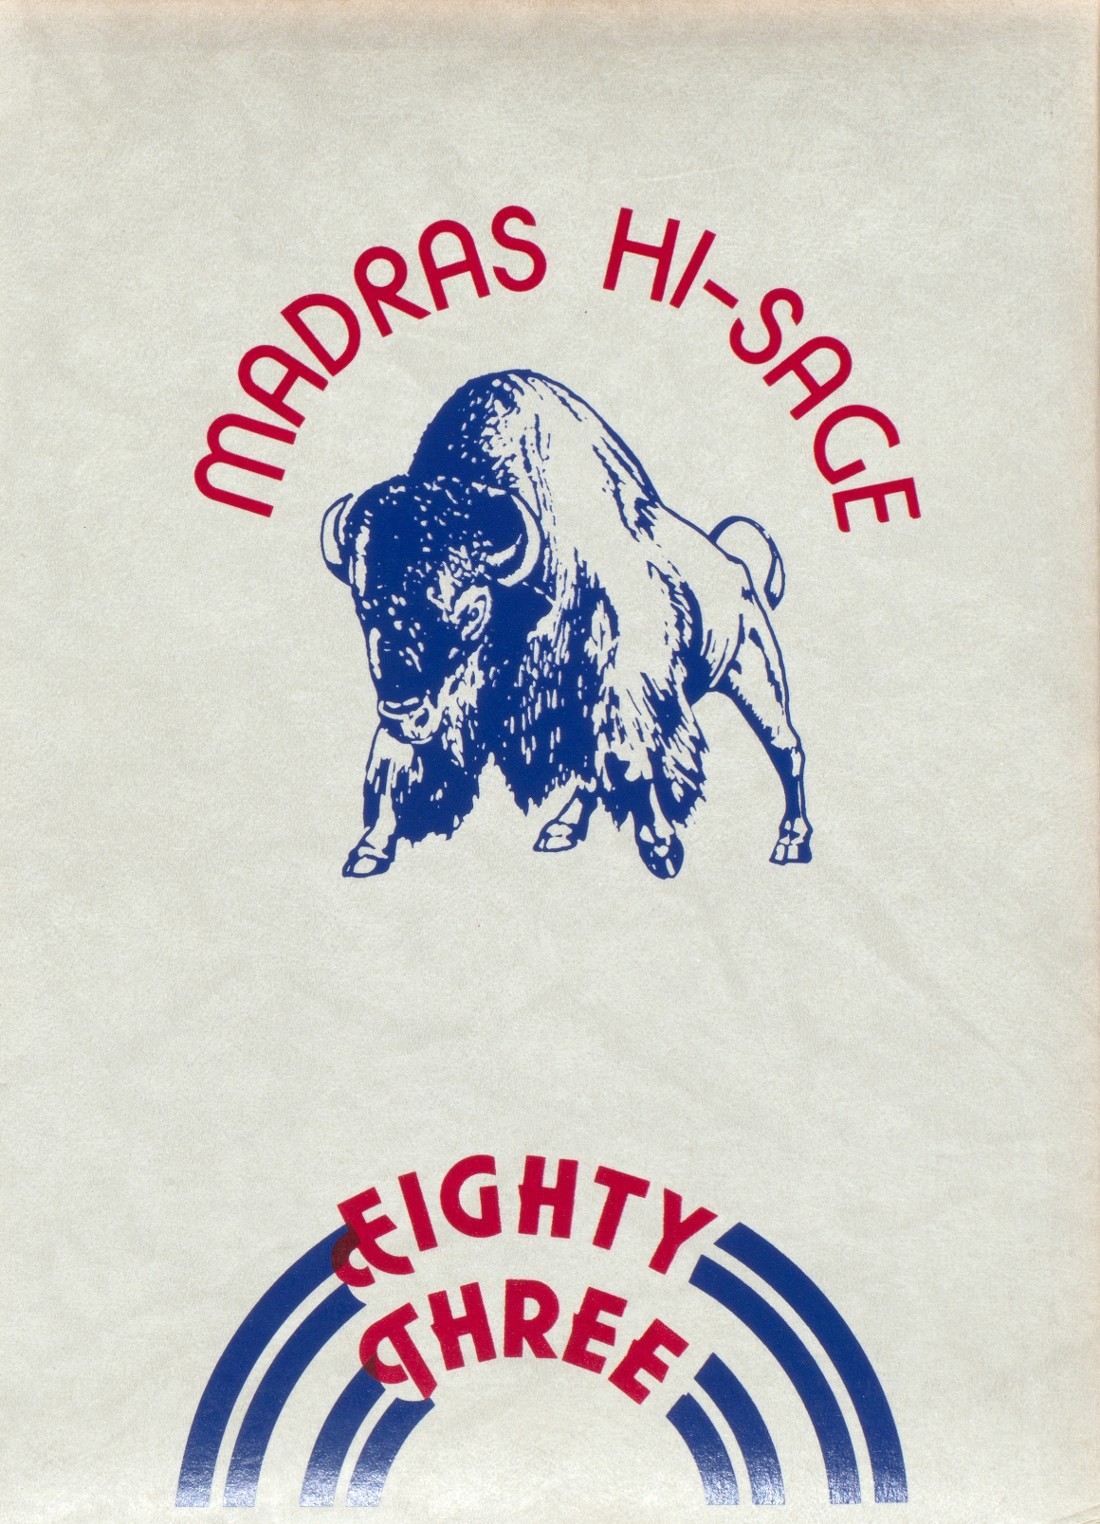 1983 yearbook from Madras High School from Madras, Oregon for sale